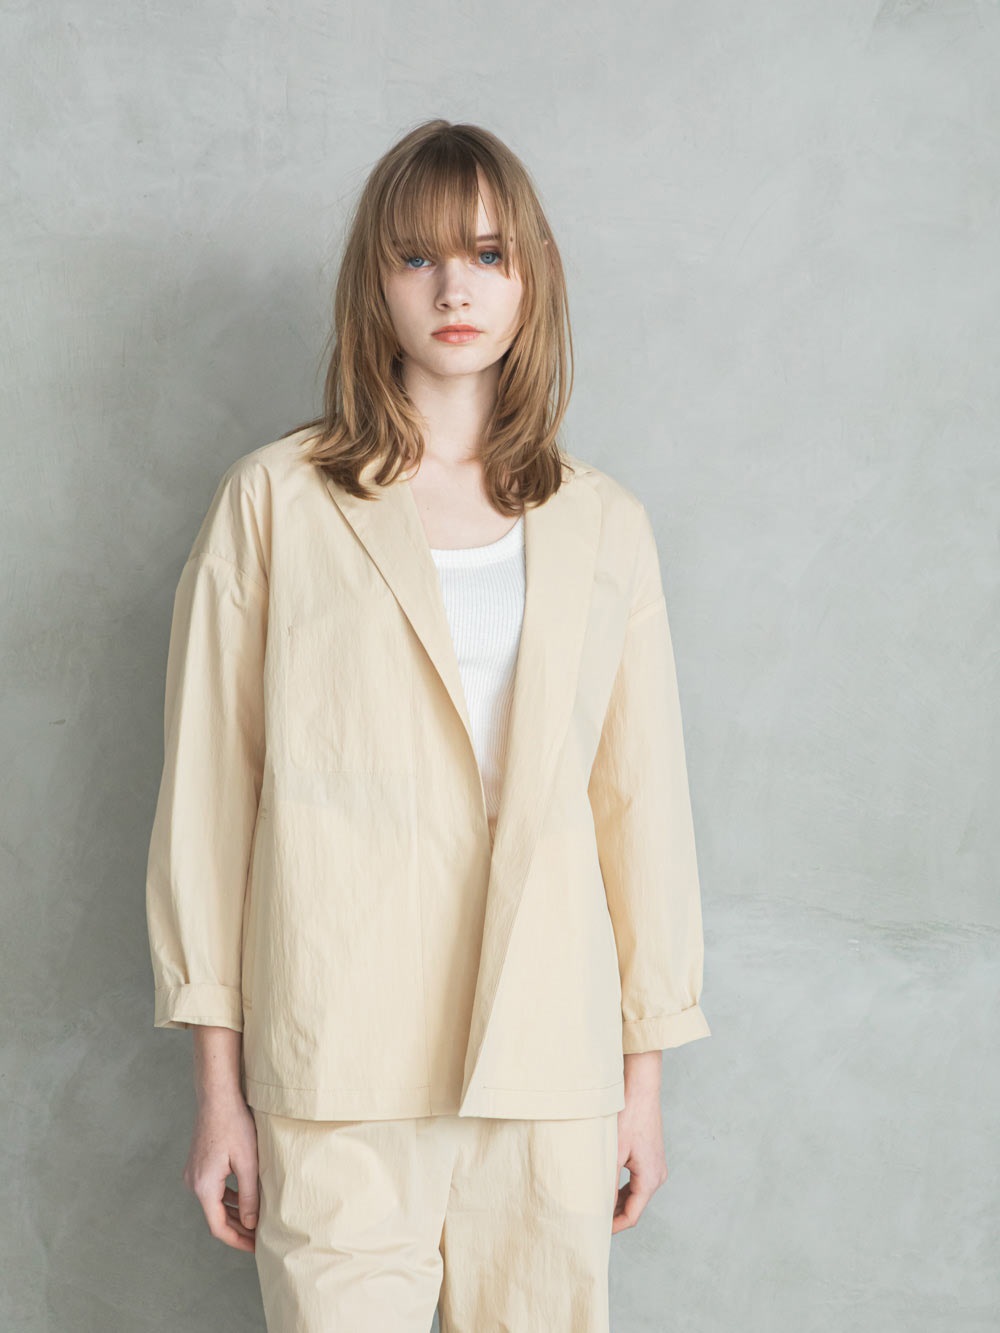 Typewriter Light Jacket | Outer | Enchainement Online Store